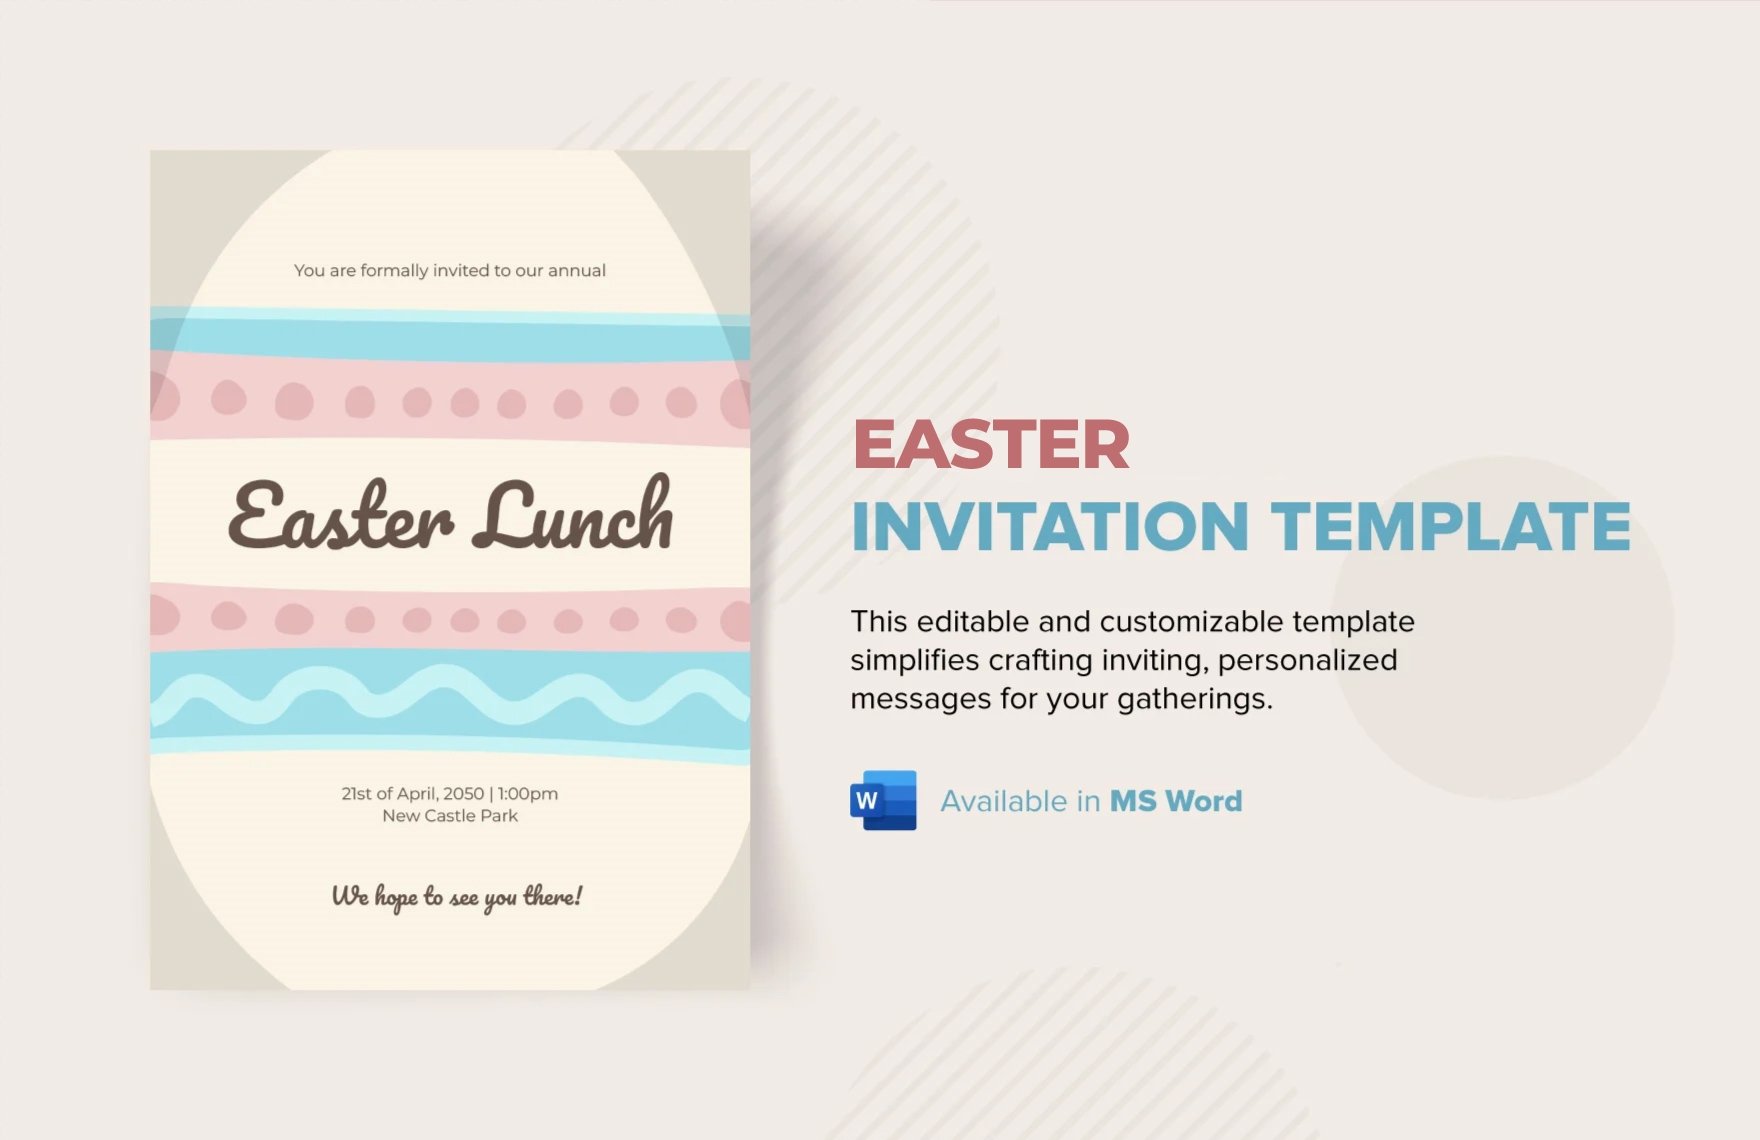 Easter Invitation Template in Word